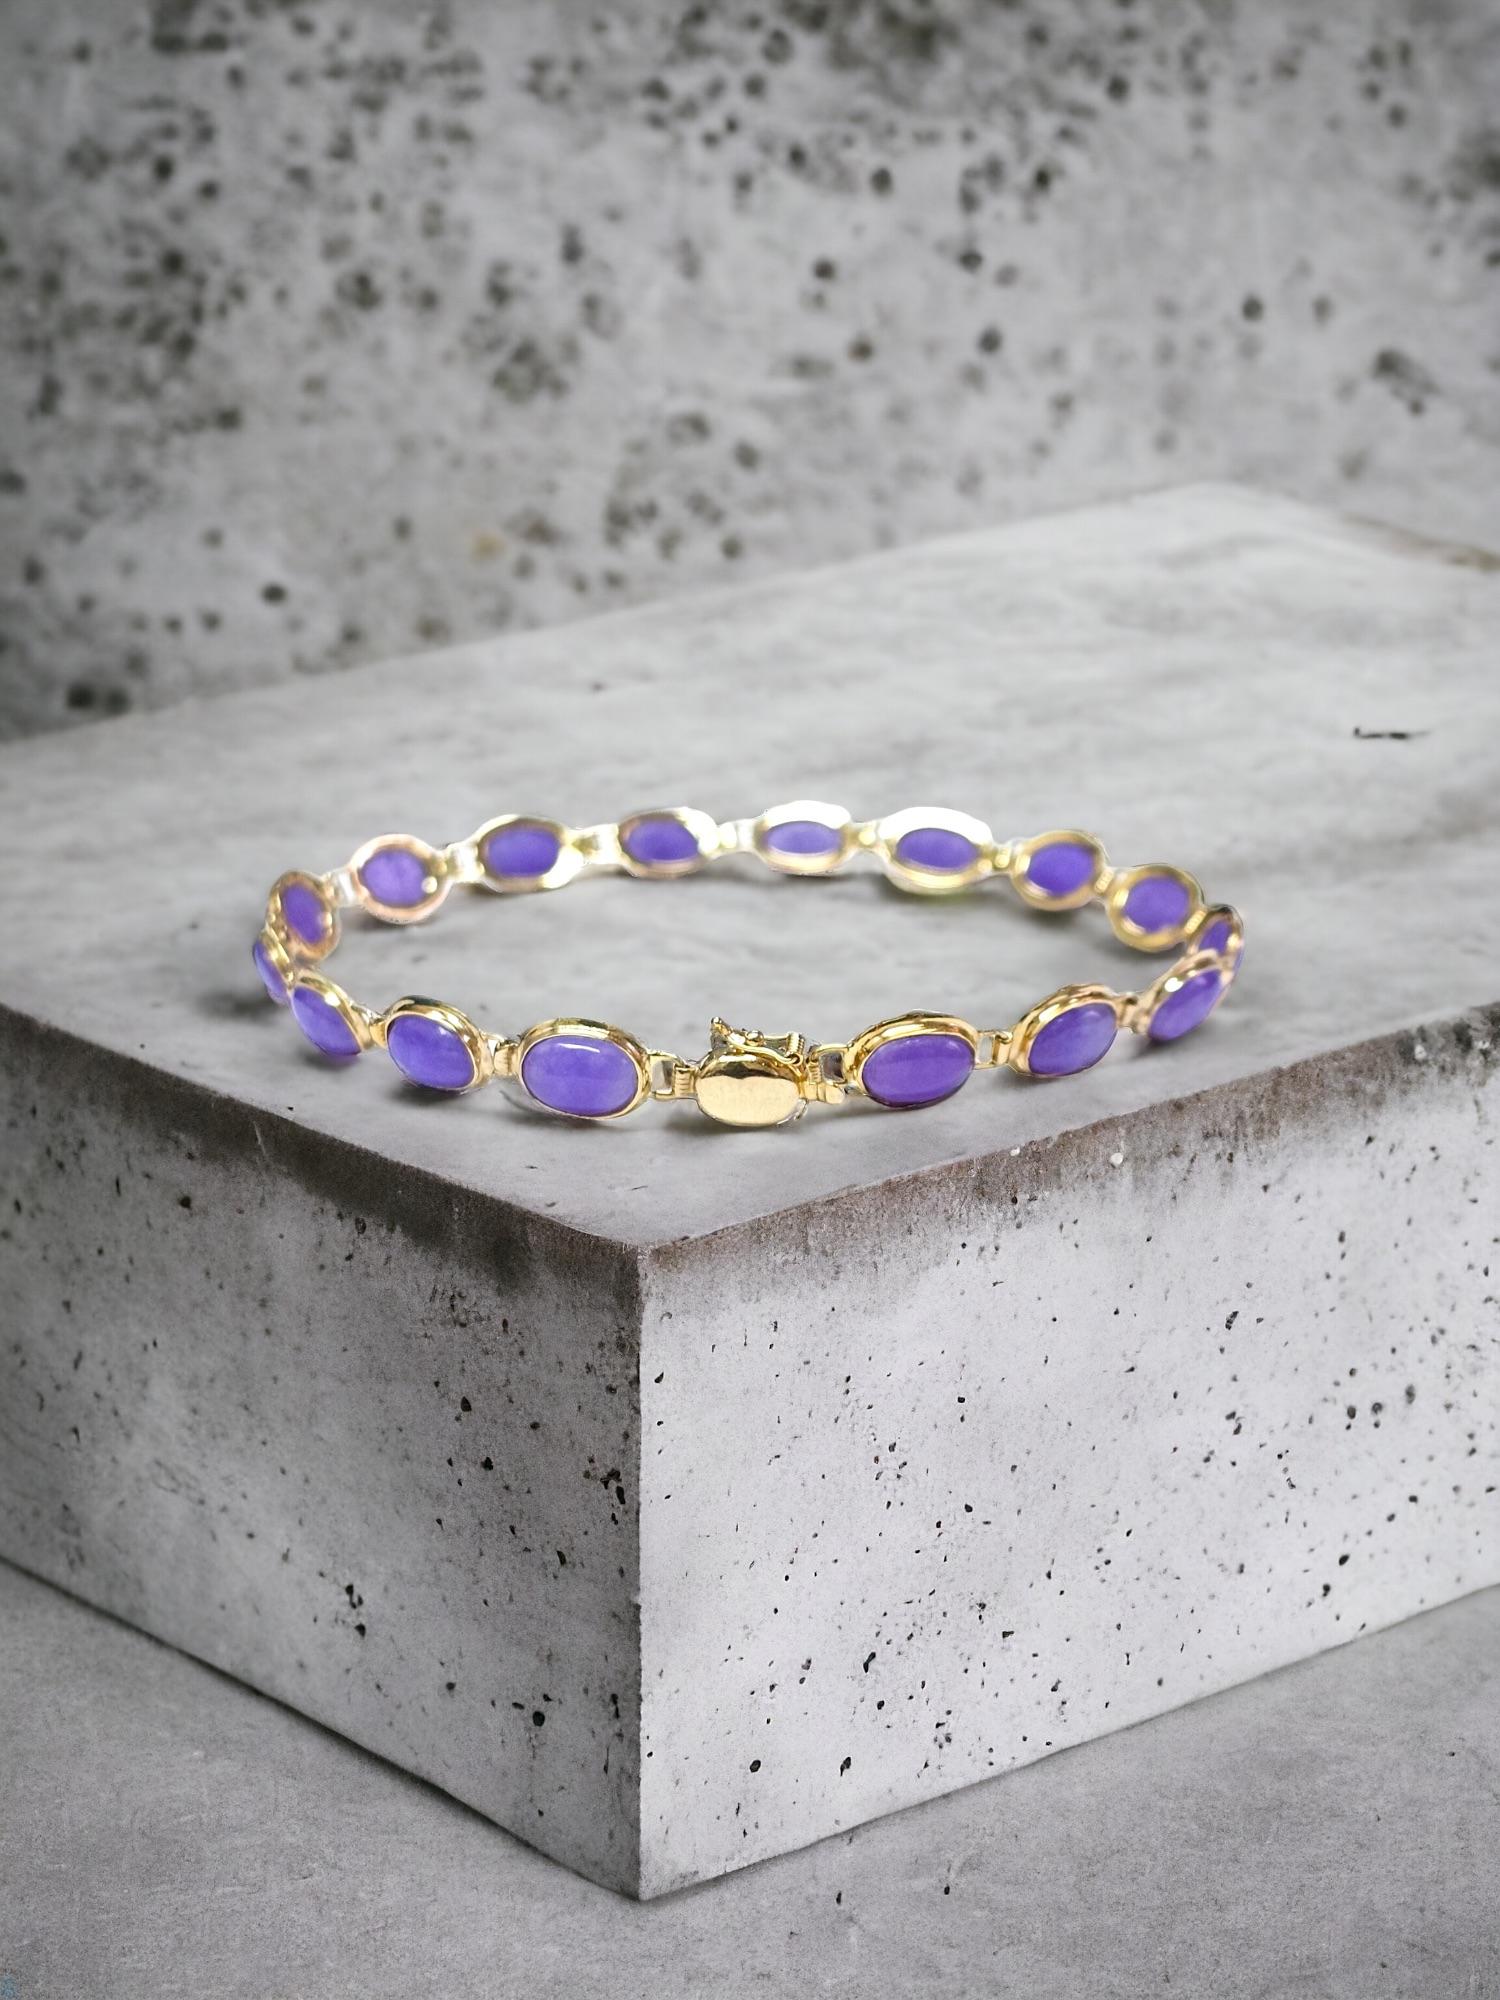 The 'Tibetan Purple Jade Bracelet' takes inspiration from the tallest mountain range in the world. Where the peaks of Jade are counter-balanced by the valleys, portrayed by the Gold links. This Purple Jade variant portrays the royalty of the